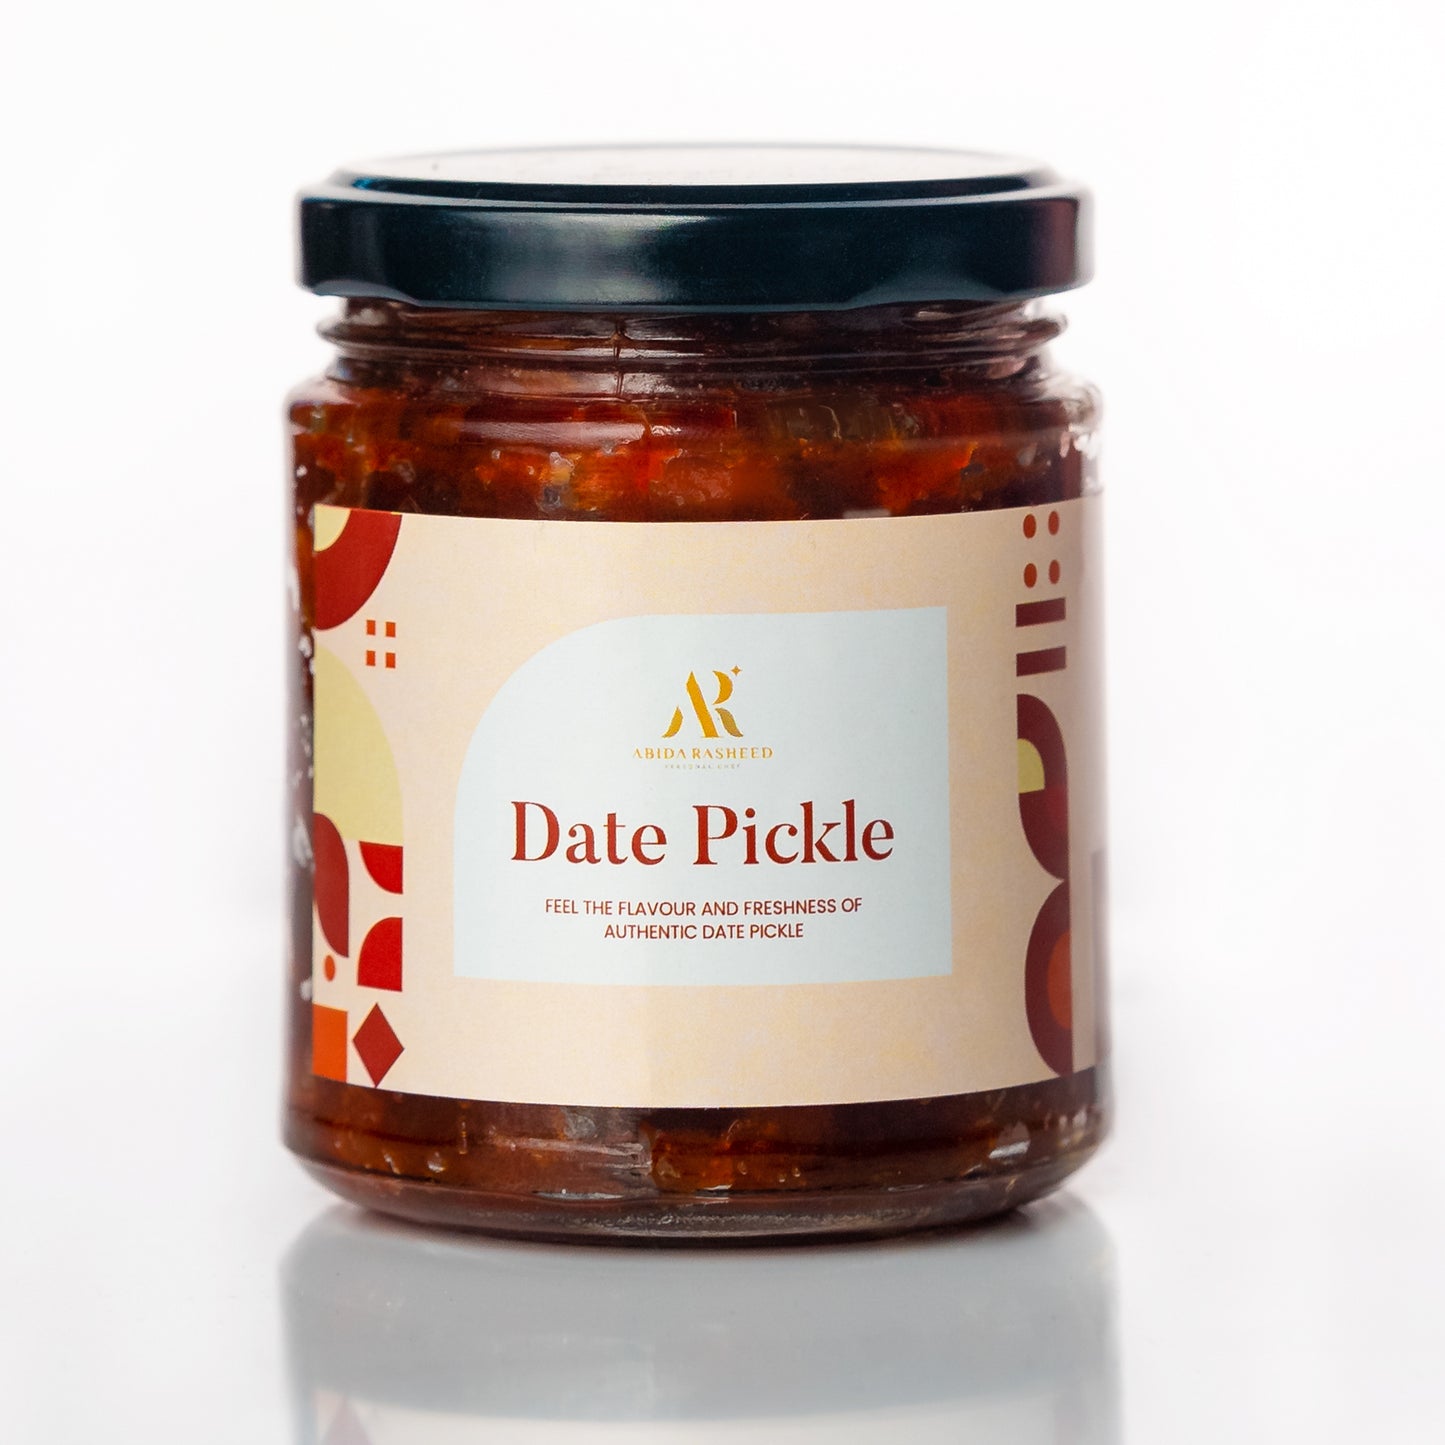 Abida Rasheed Home-Made Pickle Combo | Date Pickle |Lime and Bird's Eye Chilli Pickle|Bird's Eye Chilli in Dweep Surka